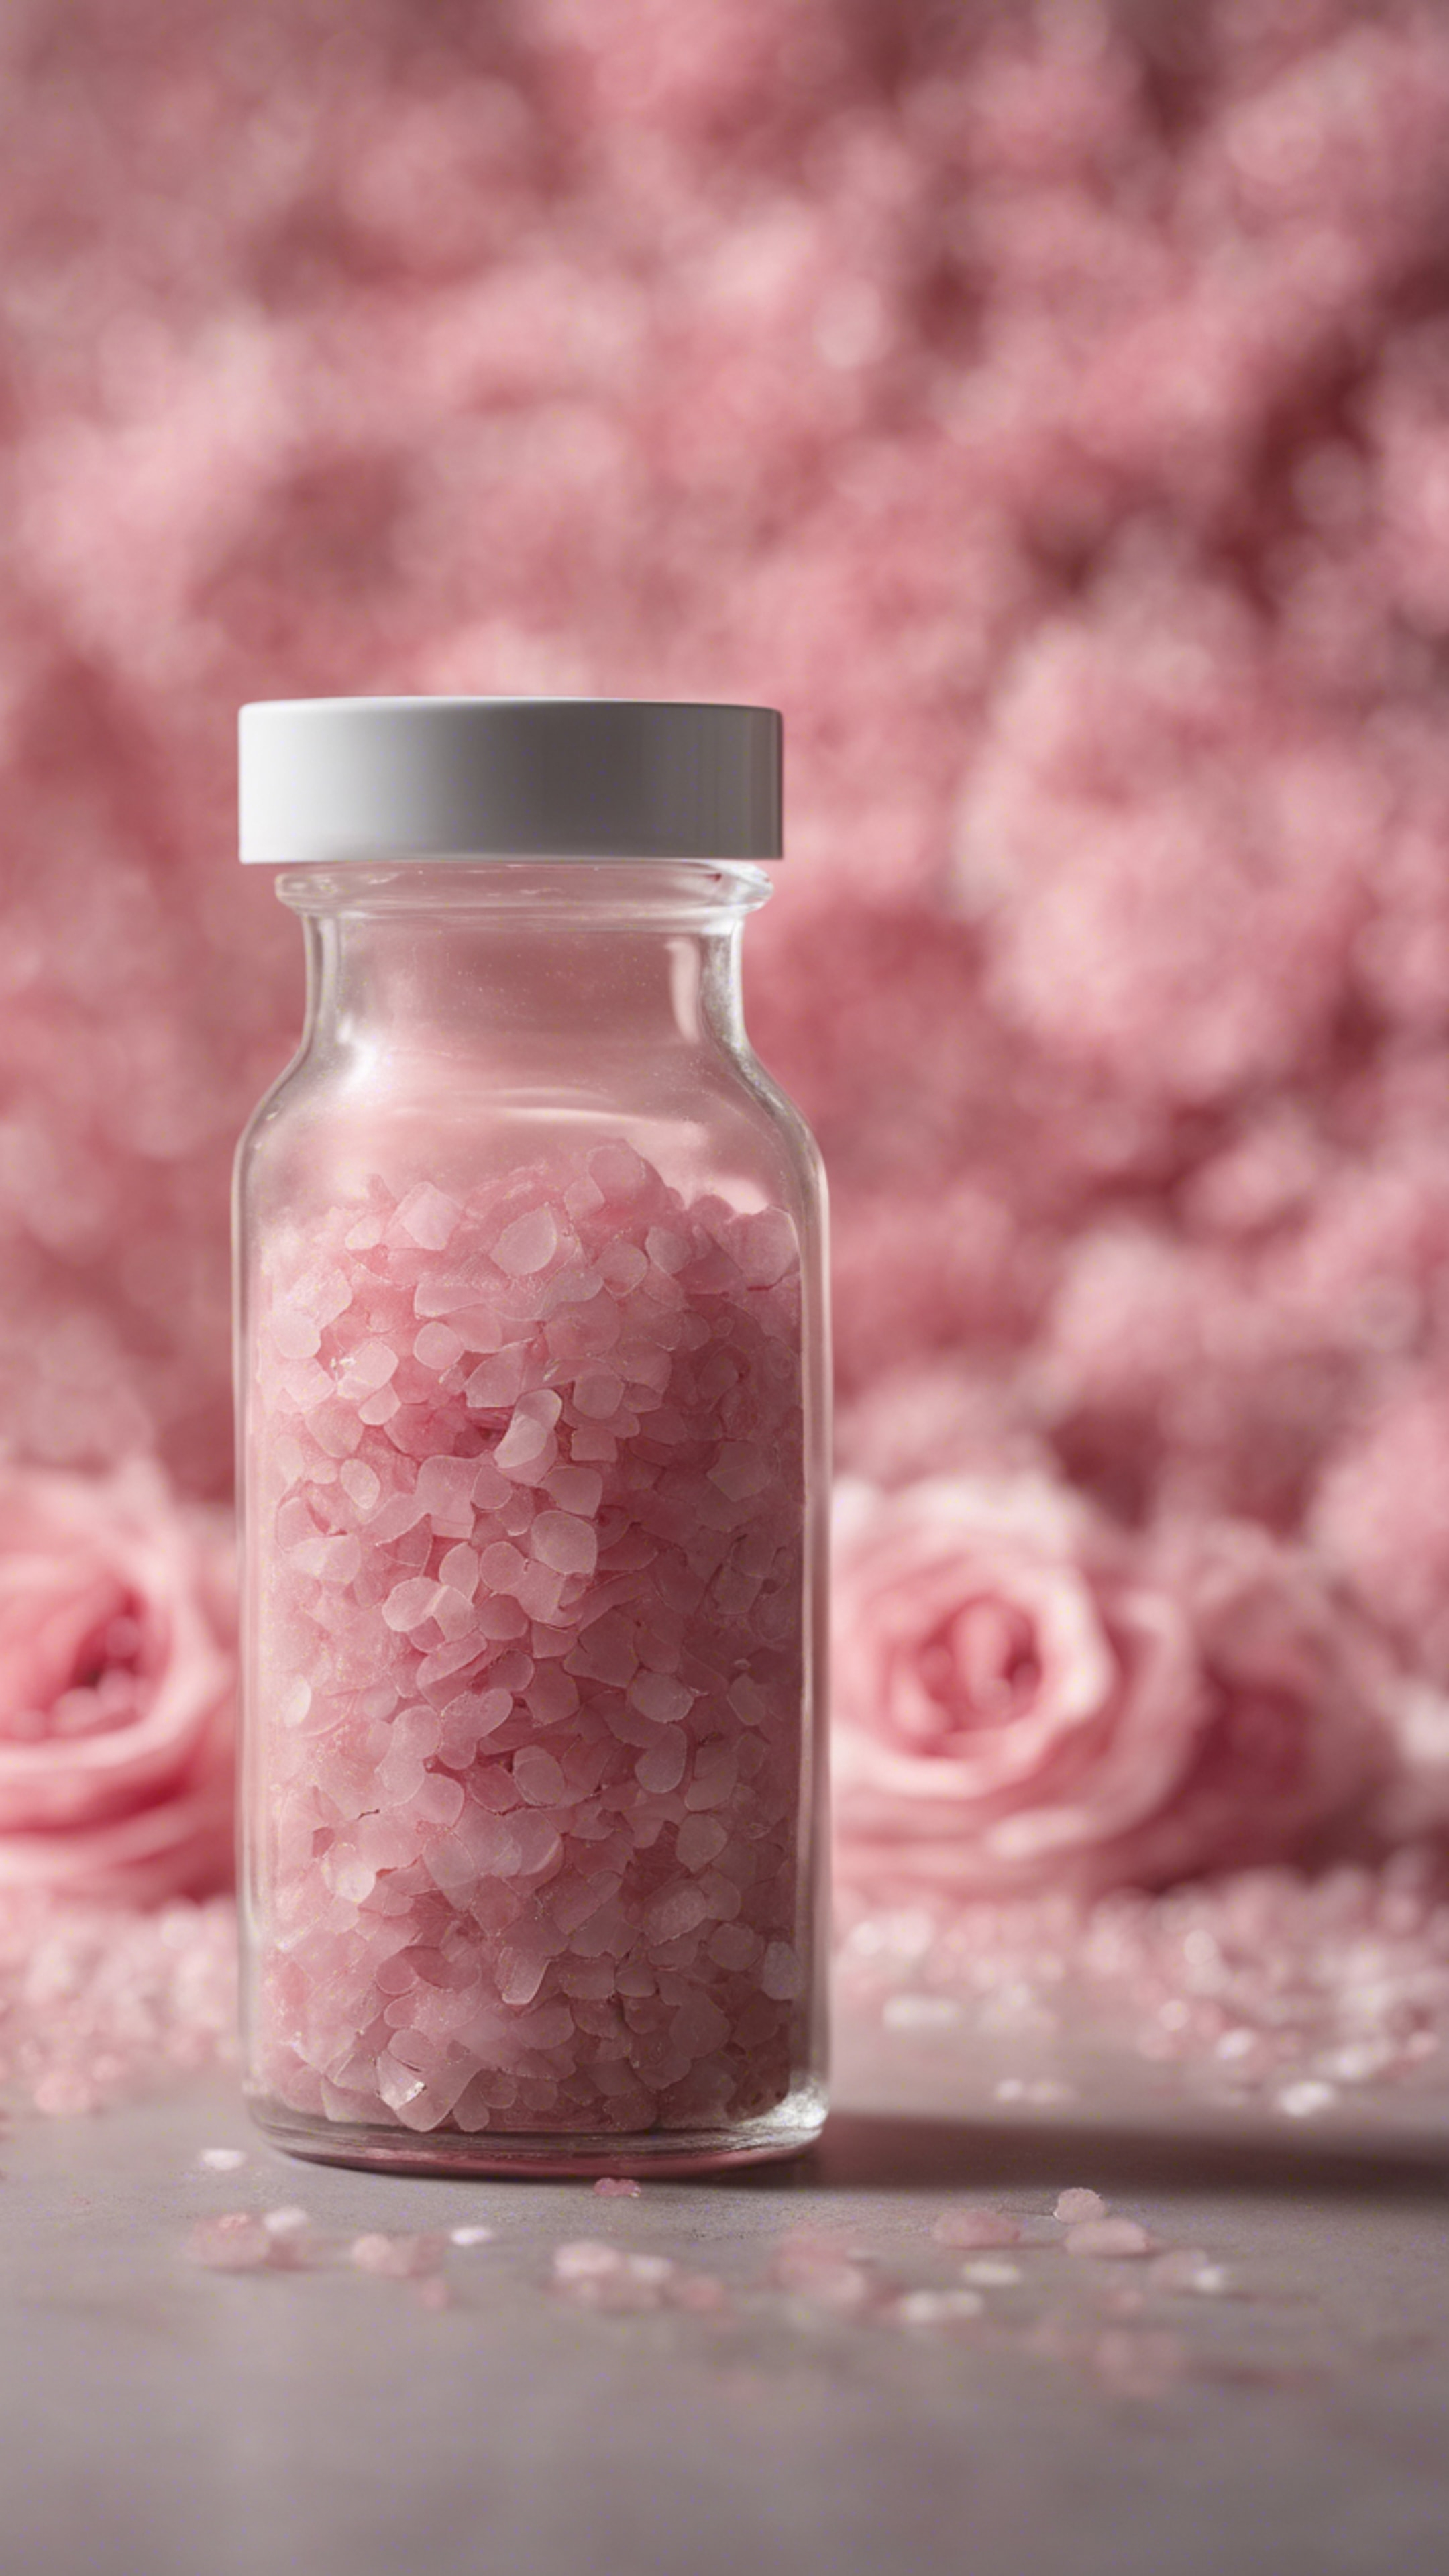 A modern, minimalist, recycled glass bottle filled with rose-colored bath salts against a concrete backdrop. วอลล์เปเปอร์[d3334b5ed23046b498f0]